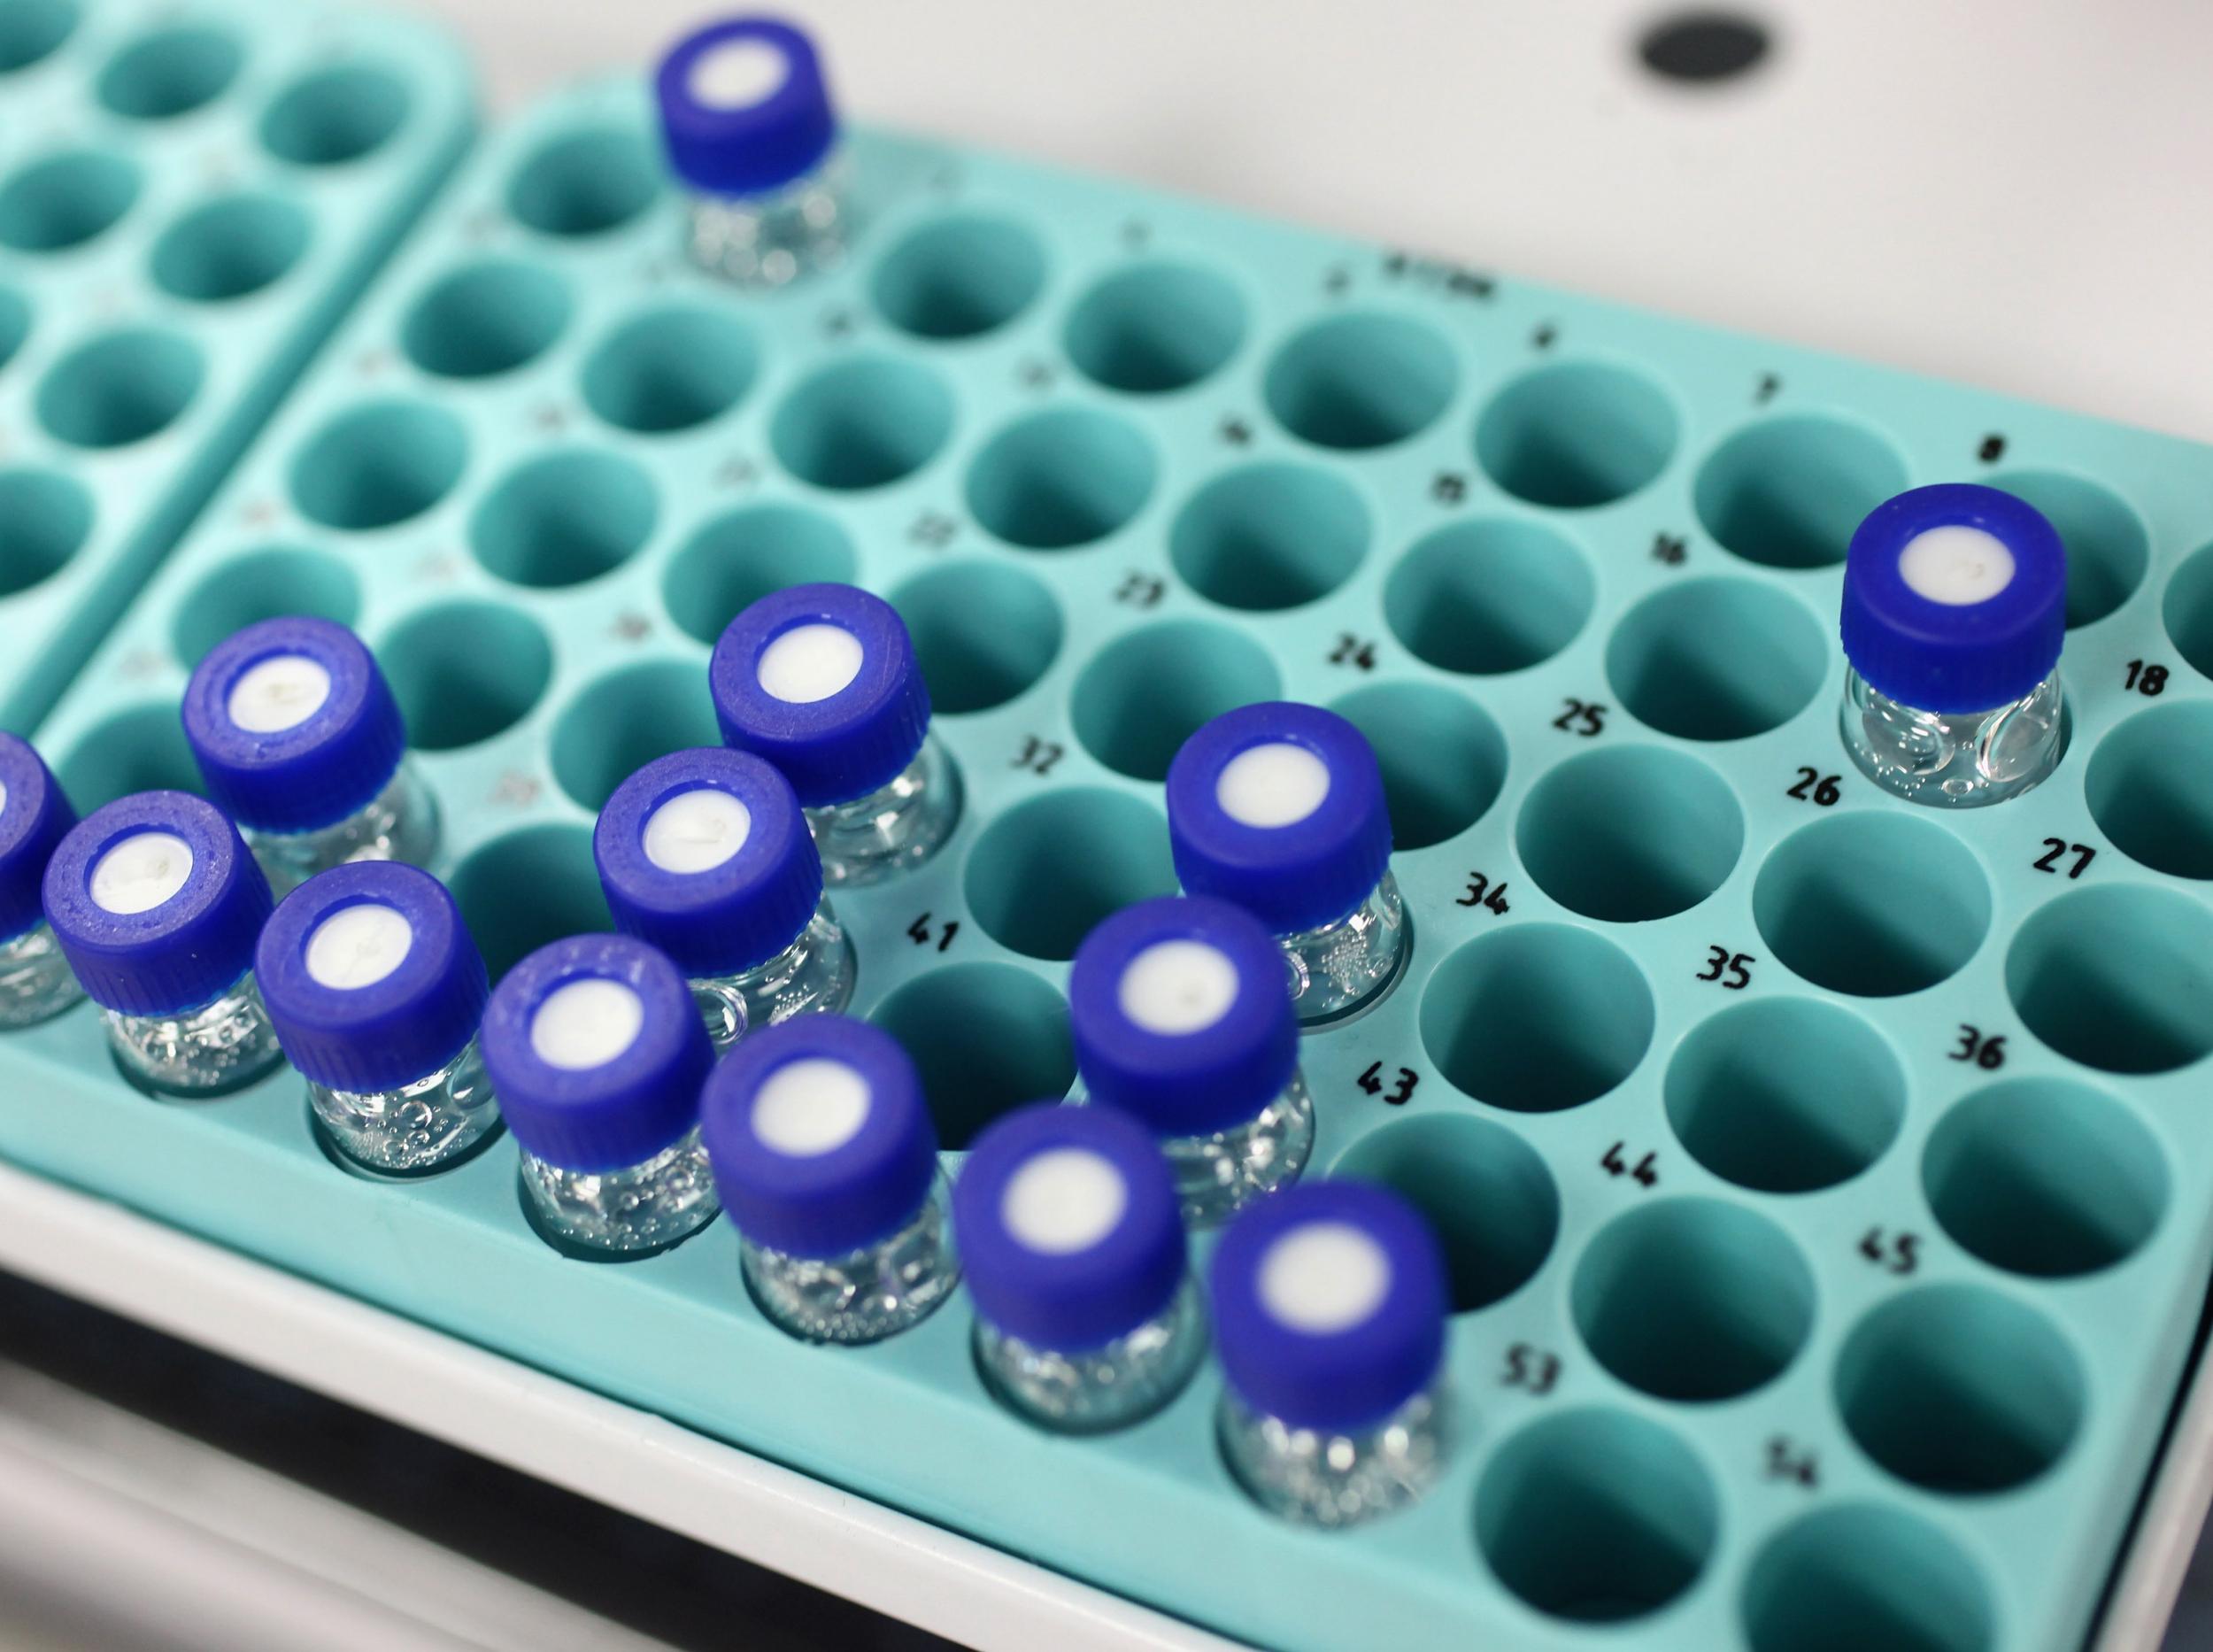 A tray of samples in the London 2012 Olympics anti-doping laboratory